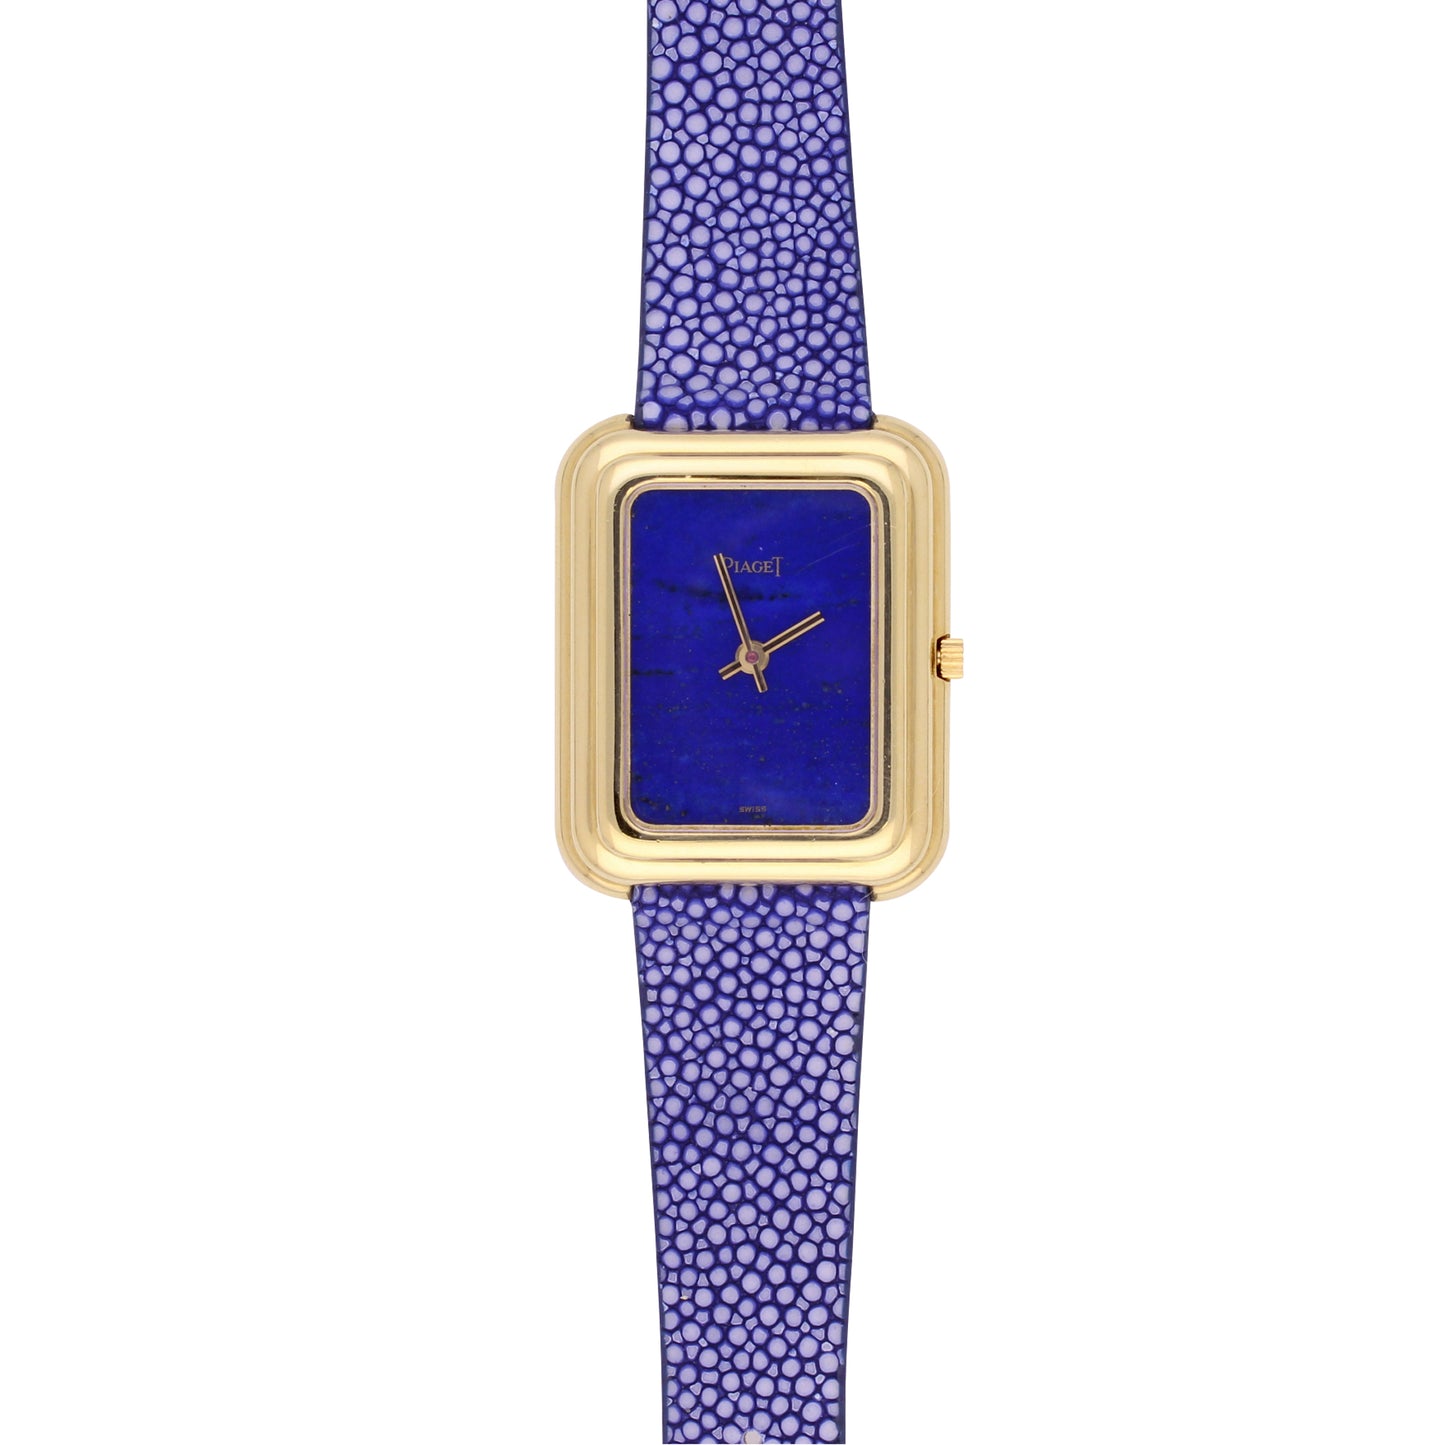 18ct yellow gold Piaget, reference 1401/1 BETA 21 wristwatch with lapis lazuli dial. Made 1972